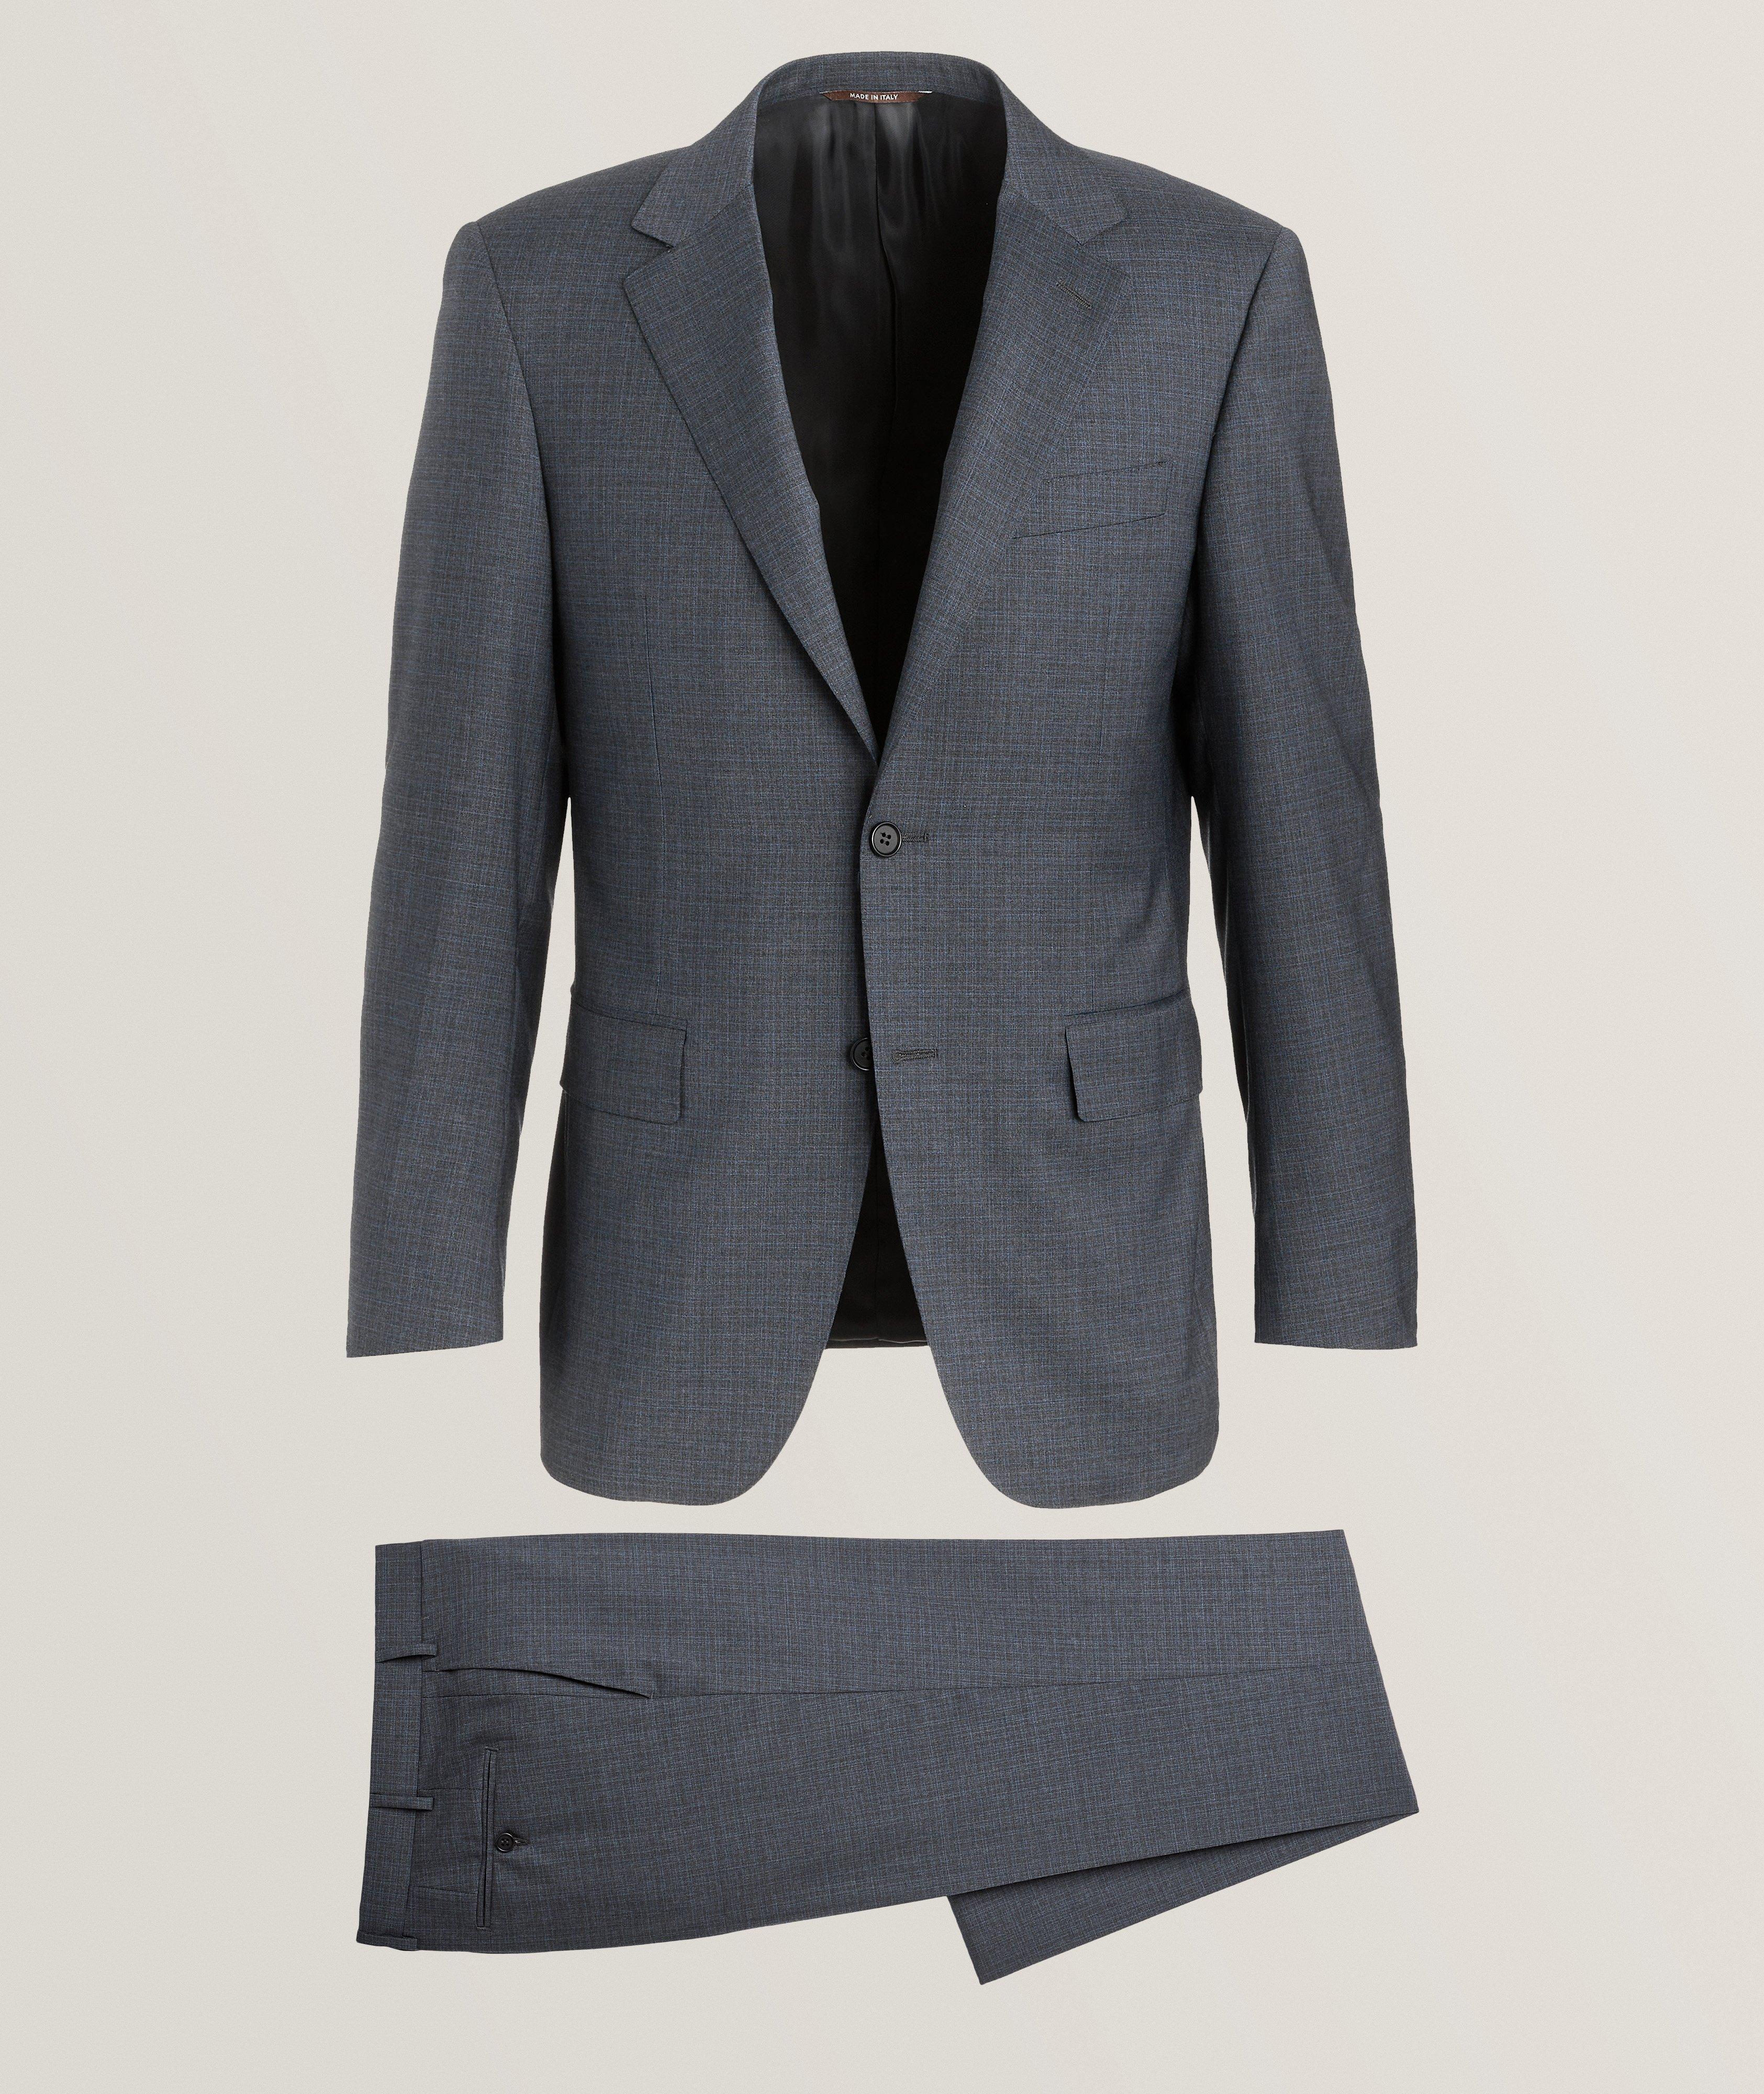 Regular-Fit Shadow Check Wool Suit  image 0